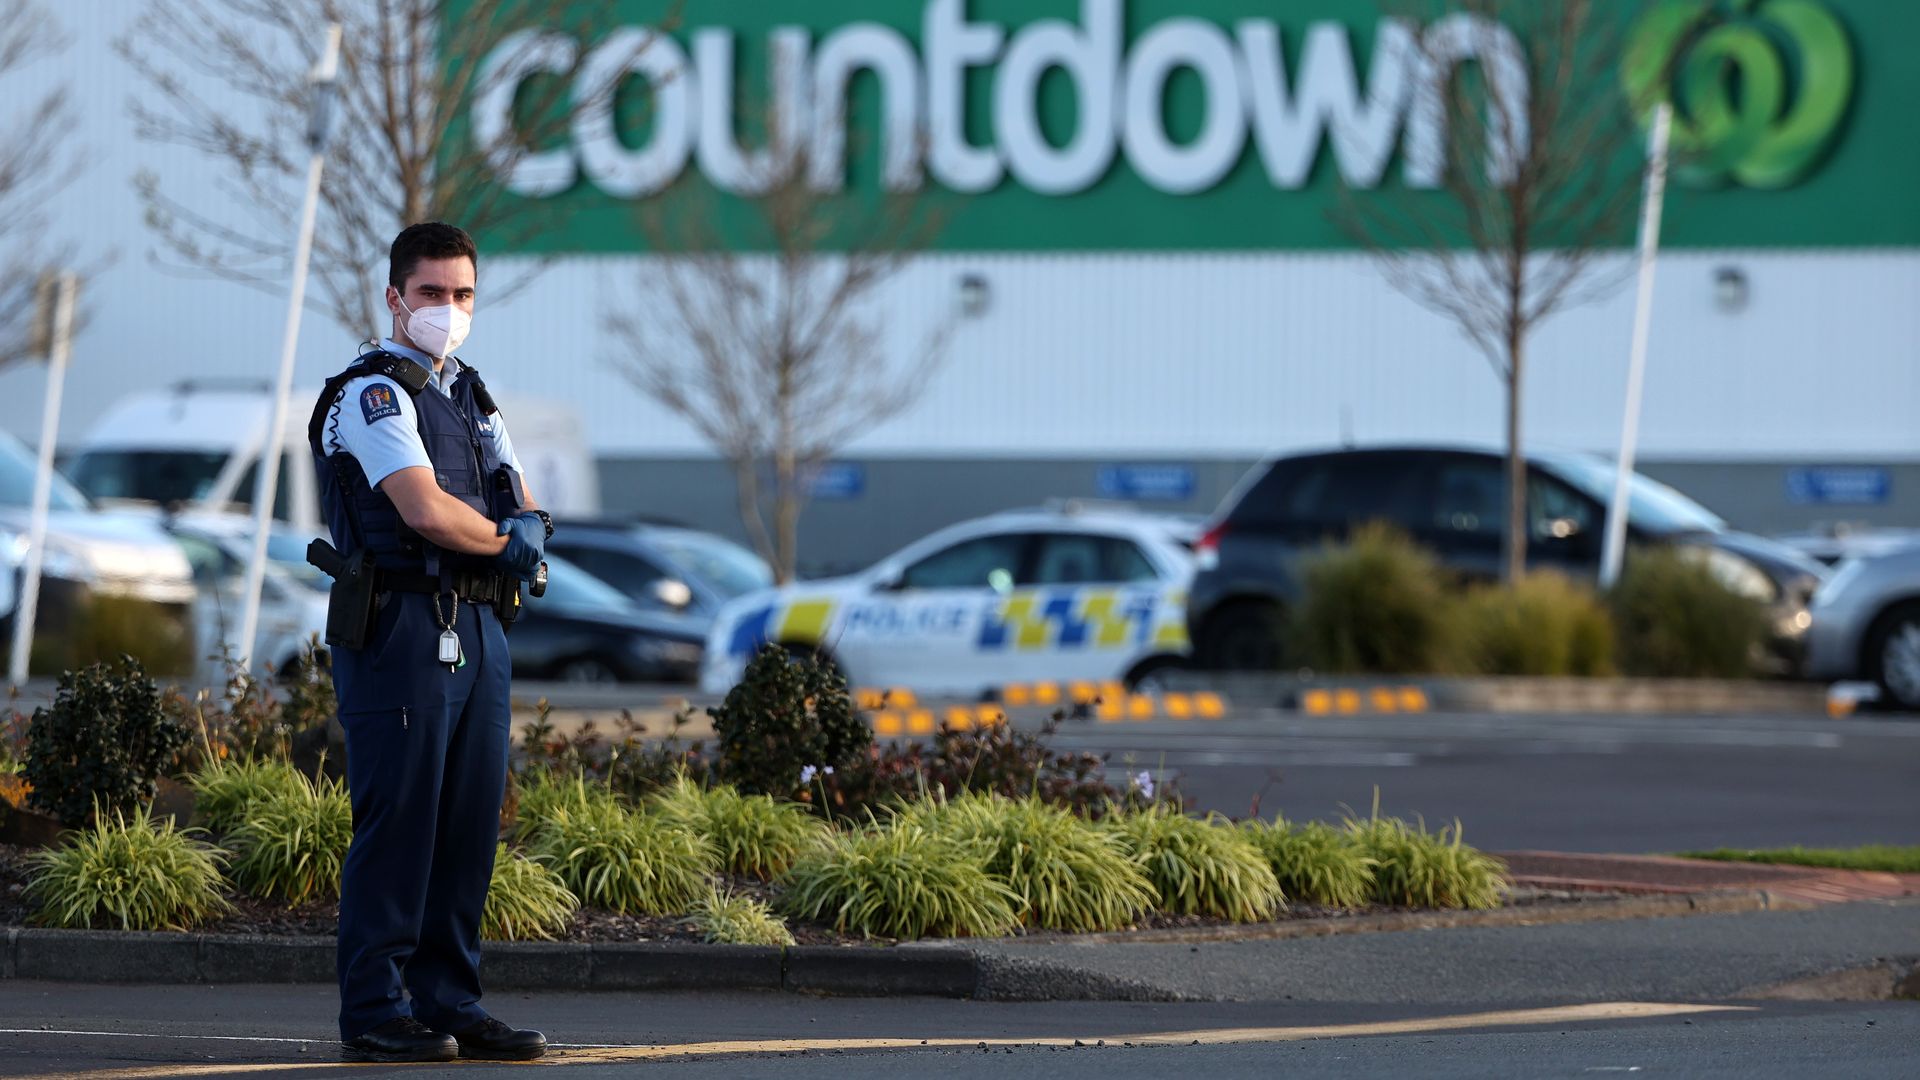  Armed police patrol the area around Countdown LynnMall after a mass stabbing incident on September 03, 2021 in Auckland, New Zealand. 